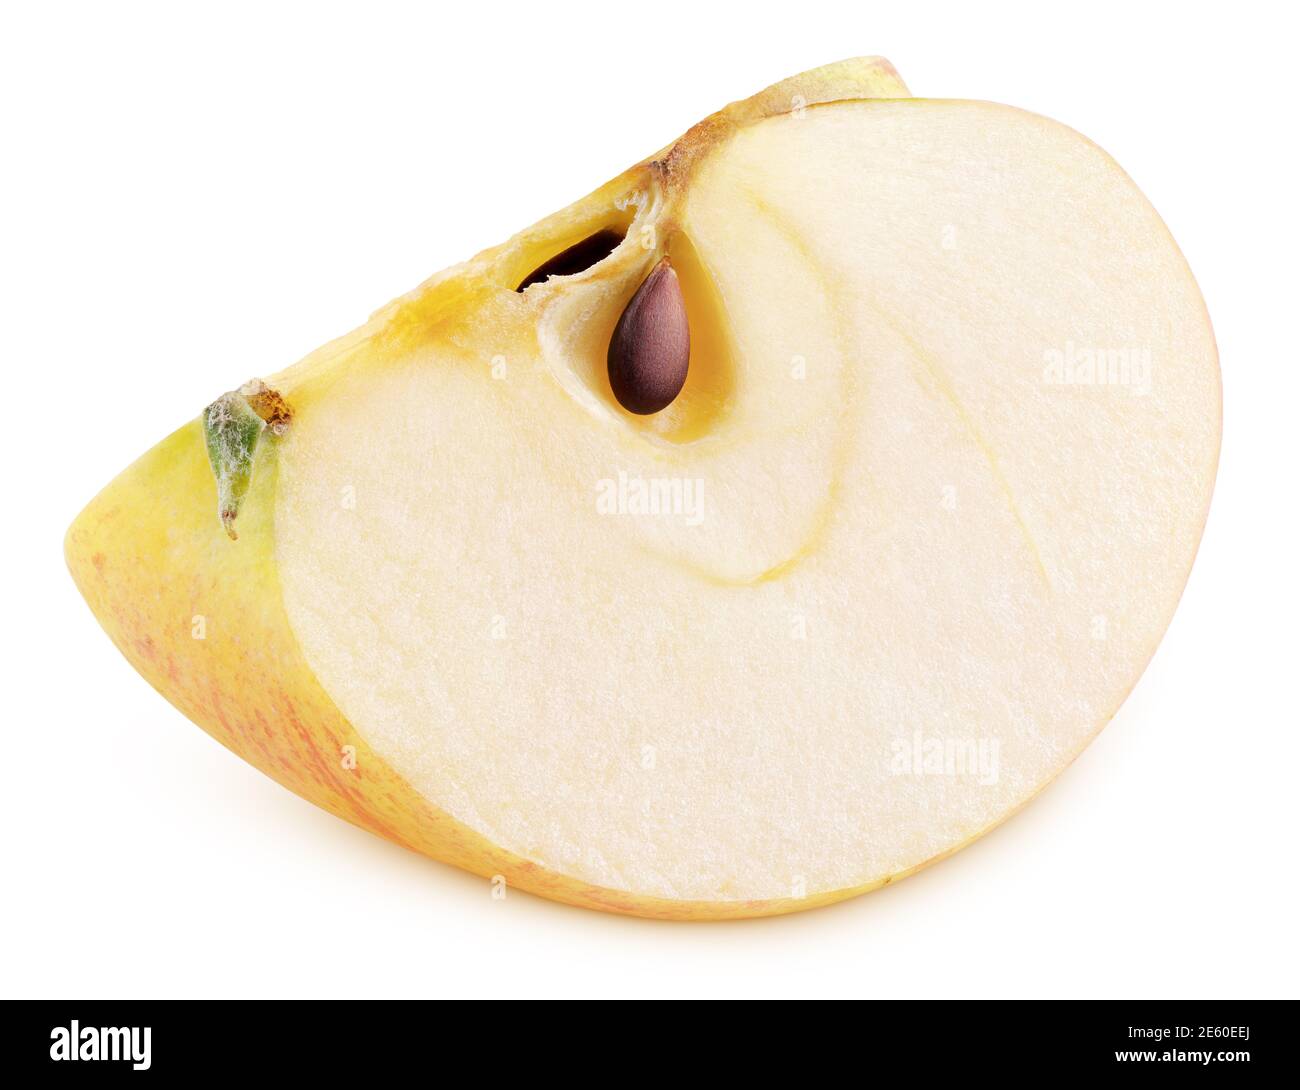 Wedge of red yellow apple fruit isolated on white background. Red apple slice with seed. Full Depth of Field Stock Photo